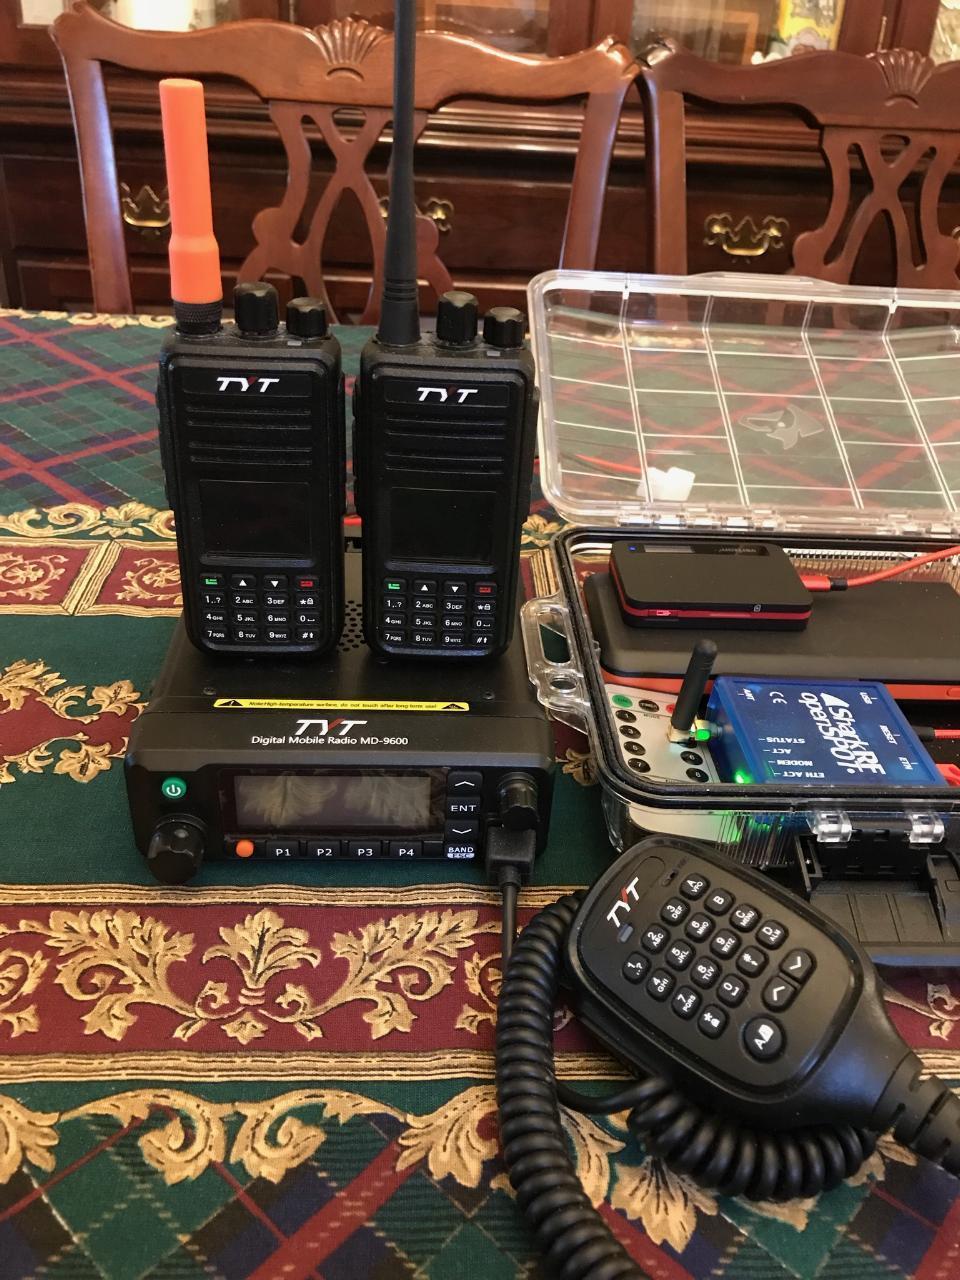 DMR HT s and a Mobile rig by TYT Rig Descriptions The TYT MD-380 on the left is programed with a CODE PLUG for a BrandMeister repeater or Zone in Newtown Square, PA.